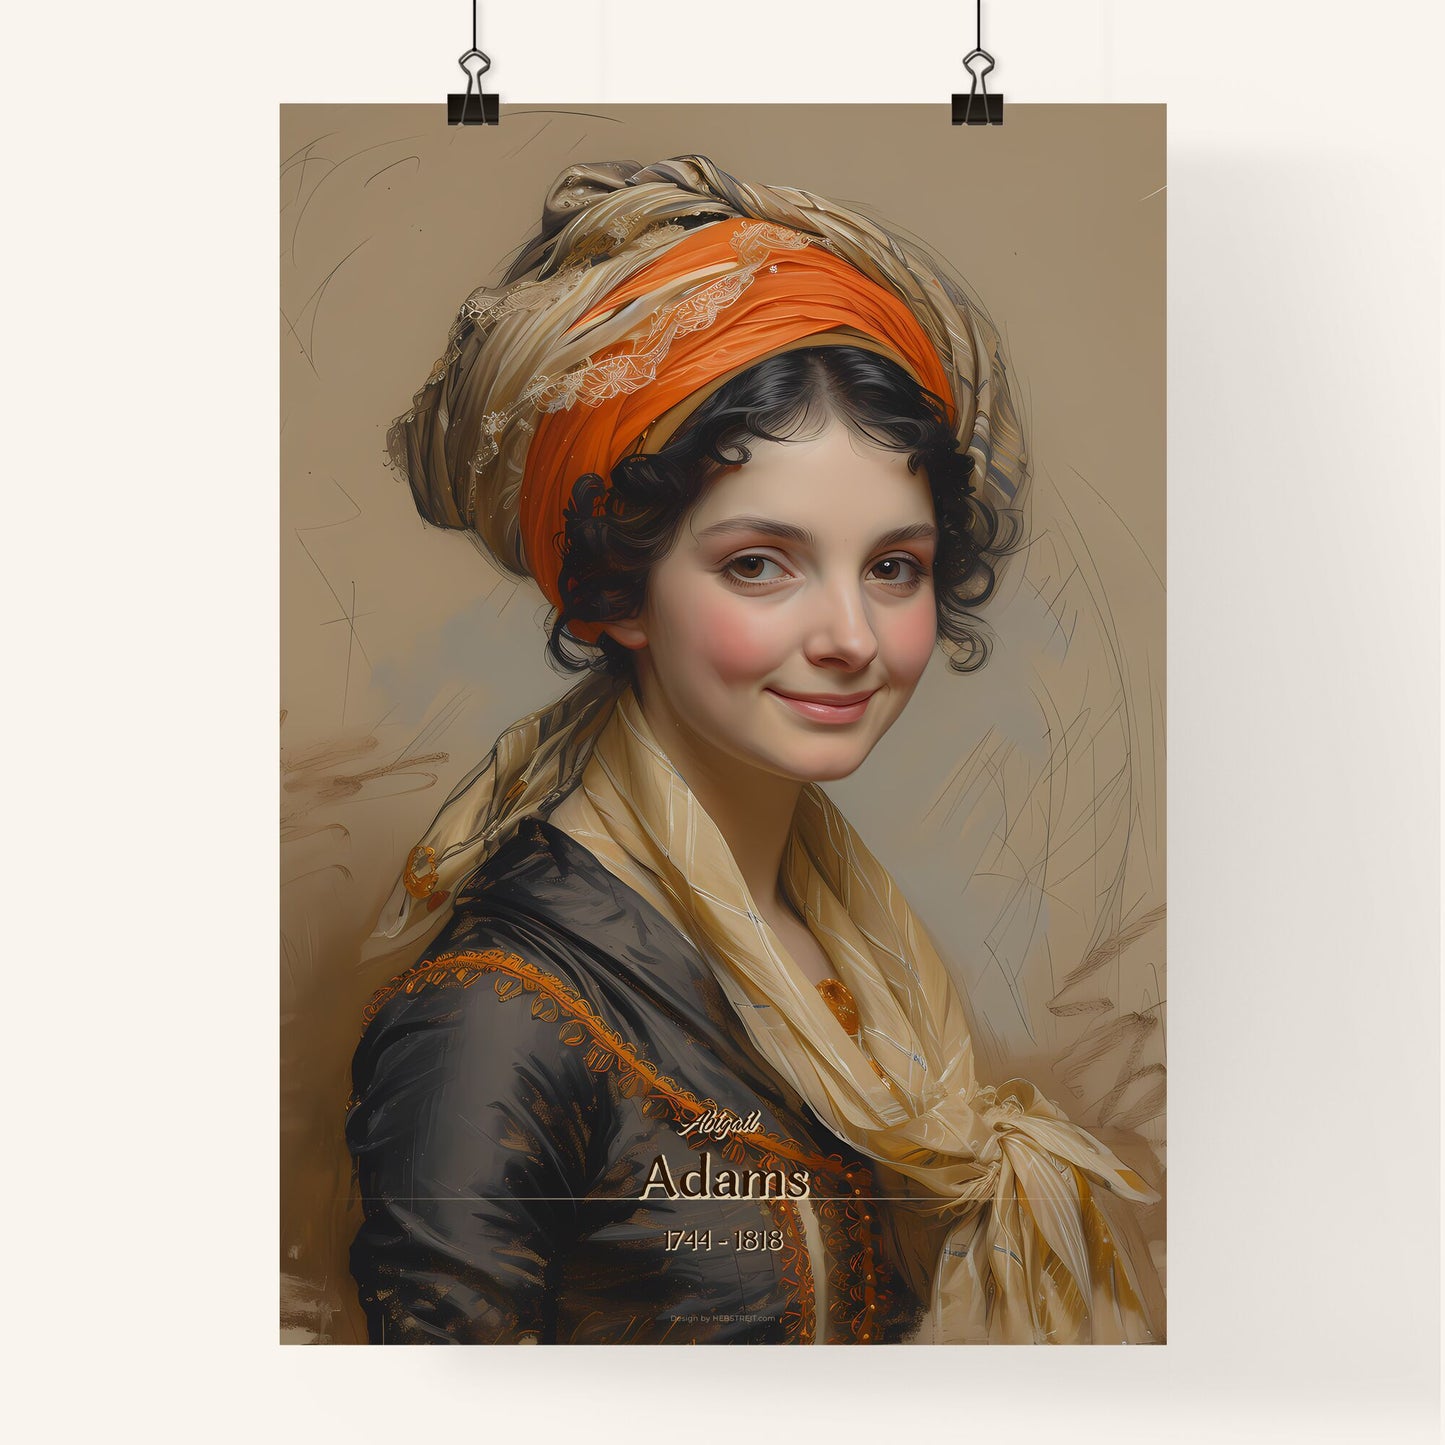 Abigail, Adams, 1744 - 1818, A Poster of a woman with a scarf and a turban Default Title